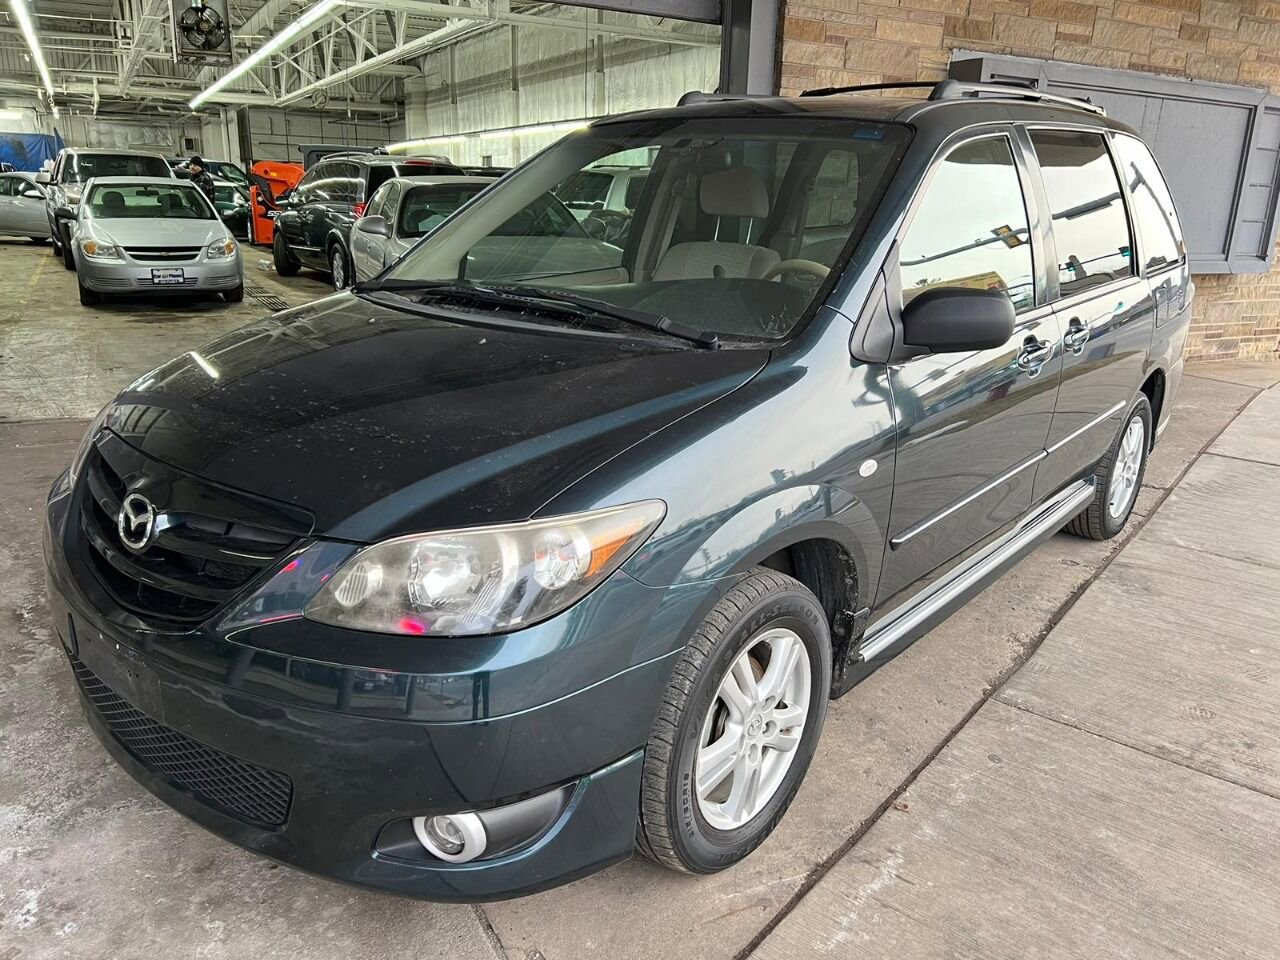 Used 2004 MAZDA MPV for Sale Right Now - Autotrader